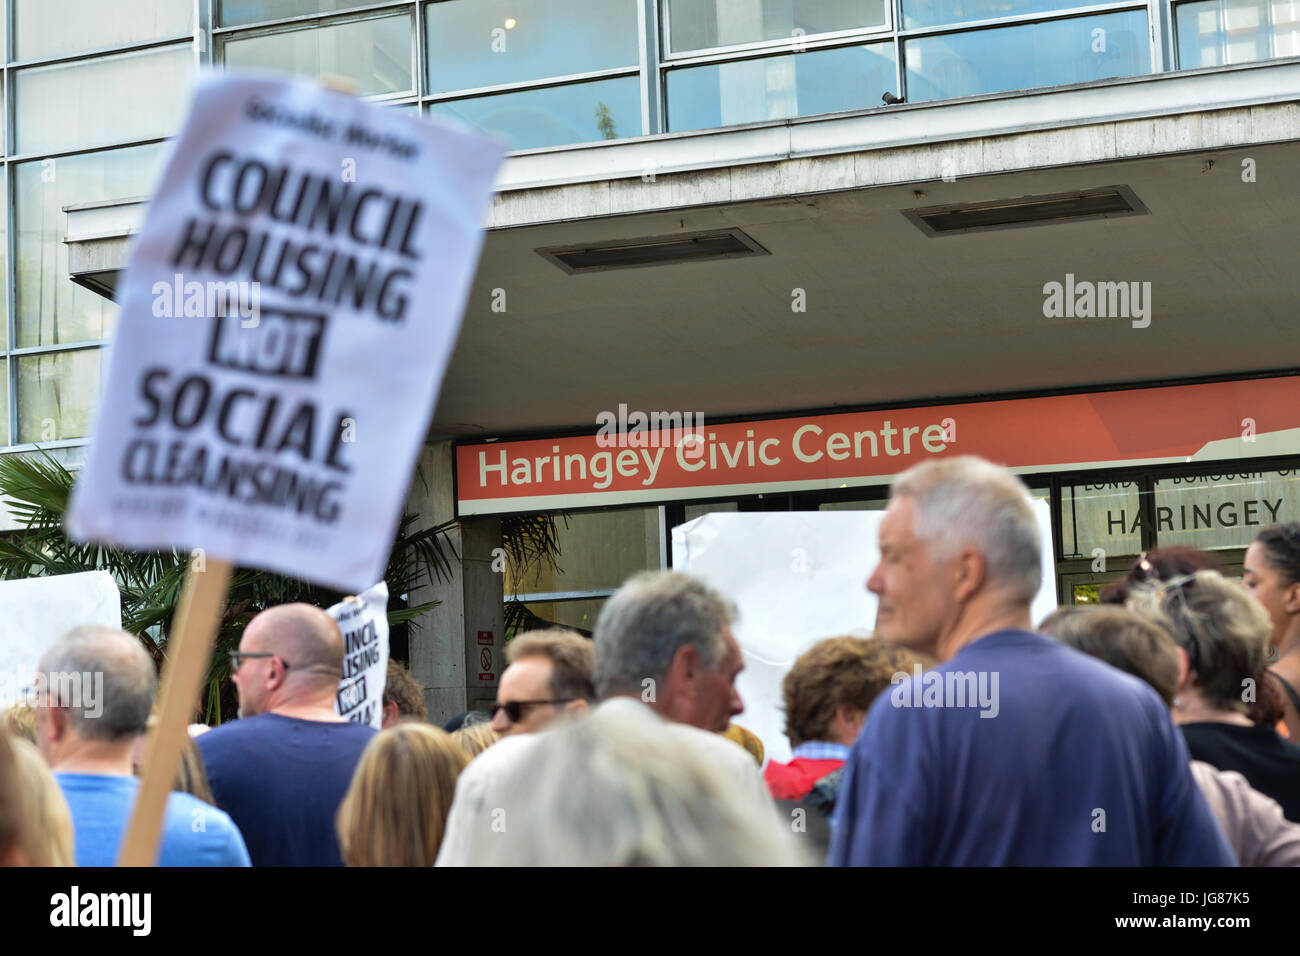 Wood Green, London, UK. 3rd July 2017. HDV Demonstration and march through Wood Green to  Haringey council civic centre against the HDV, a jointly owned private company of Haringey Council and private developer Lendlease, due to start today, 3rd July. Credit: Matthew Chattle/Alamy Live News Stock Photo